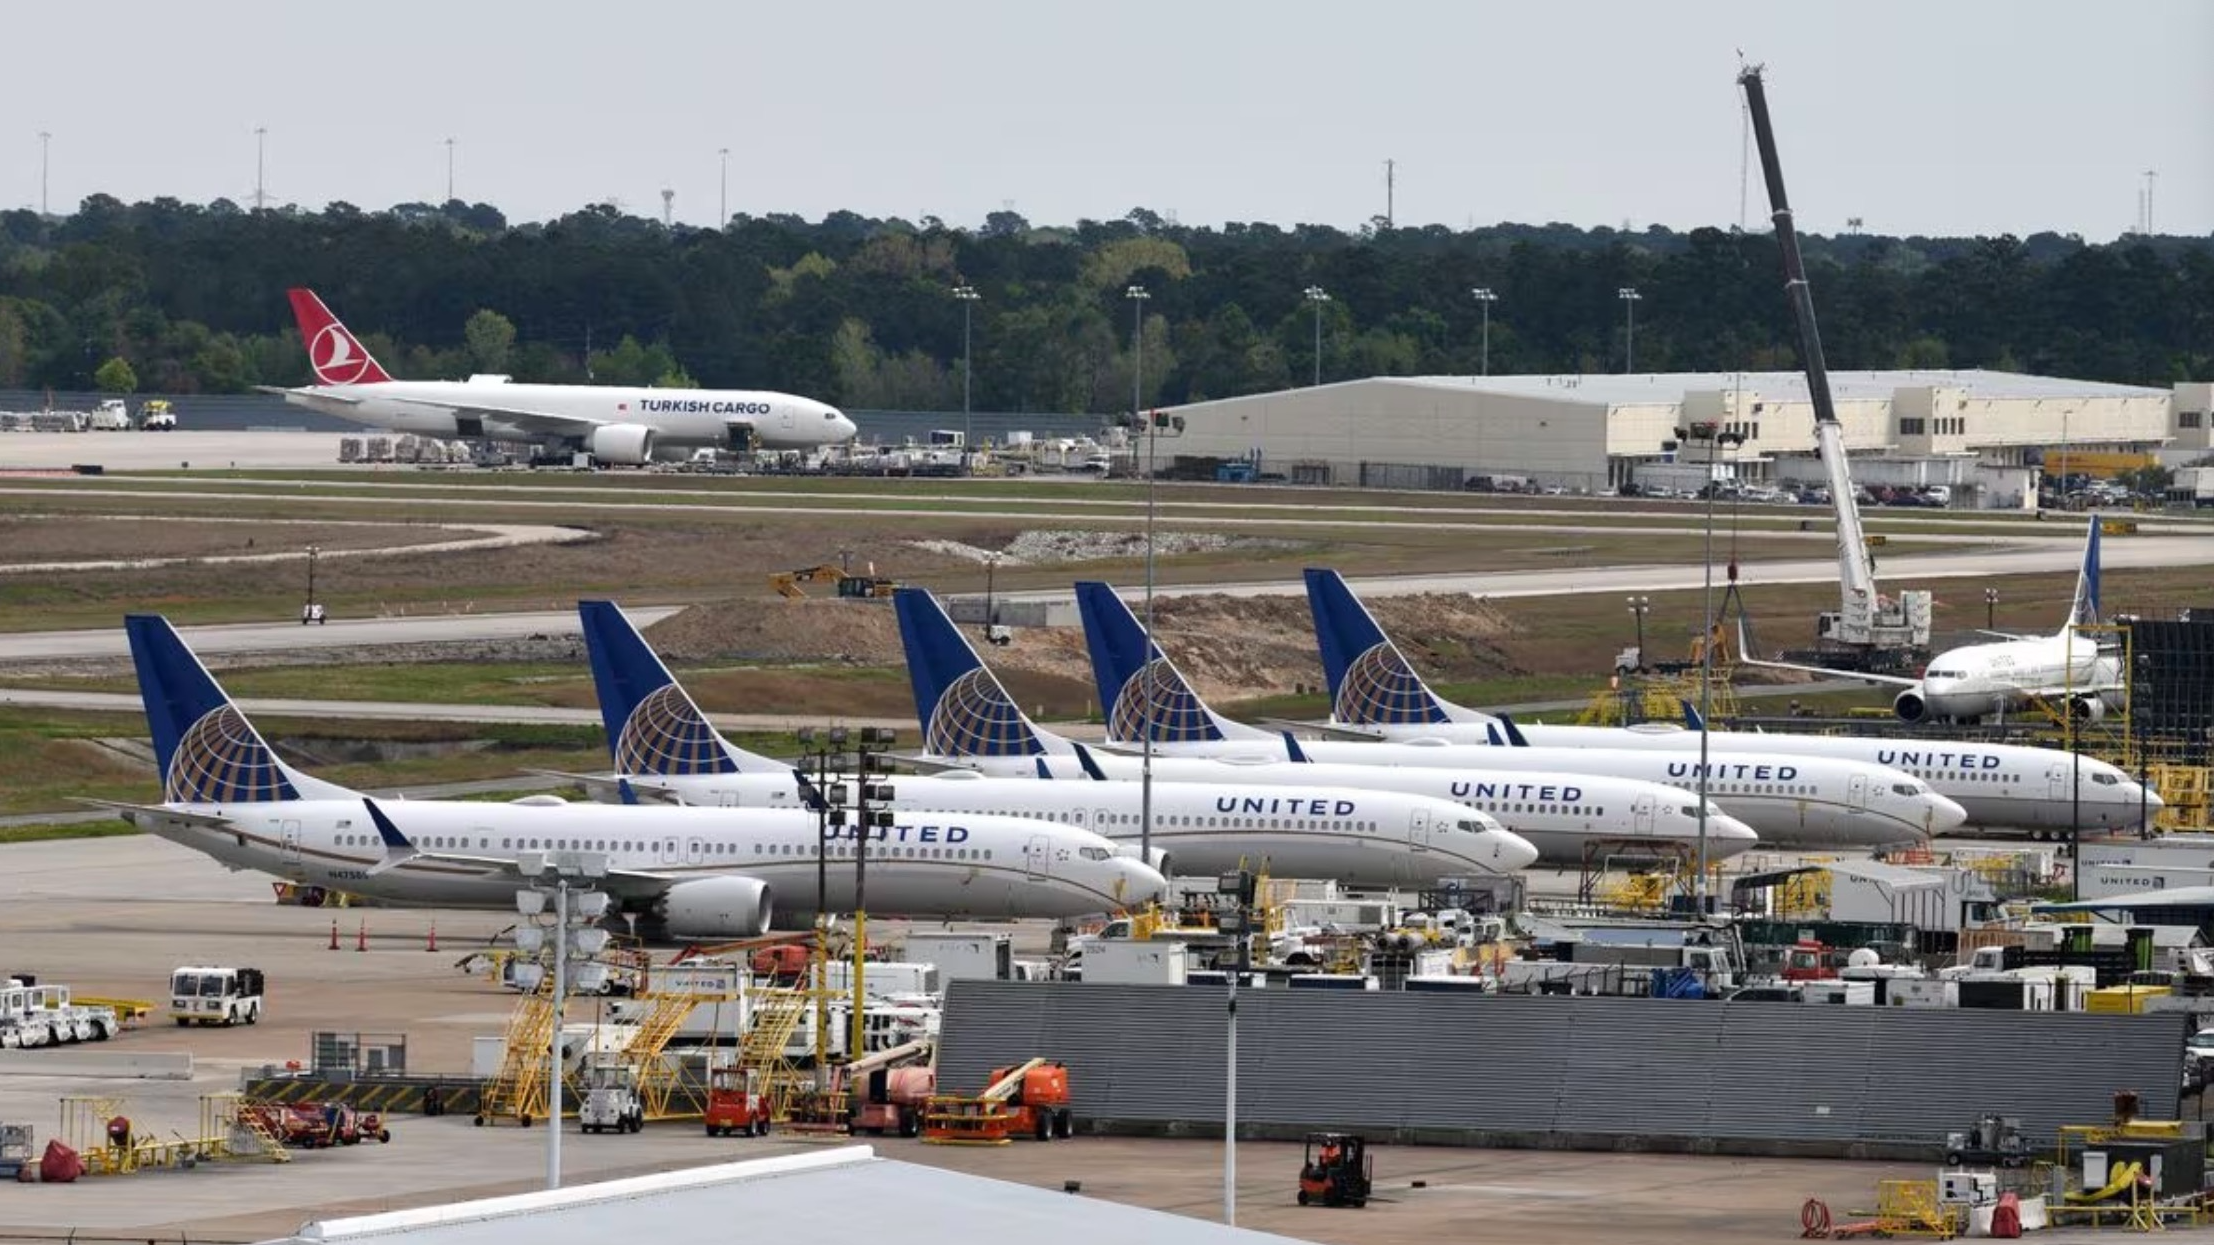 United Airlines planes, including a Boeing 737 MAX 9 model, are pictured at George Bush Intercontinental Airport in Houston, Texas, U.S. /Reuters